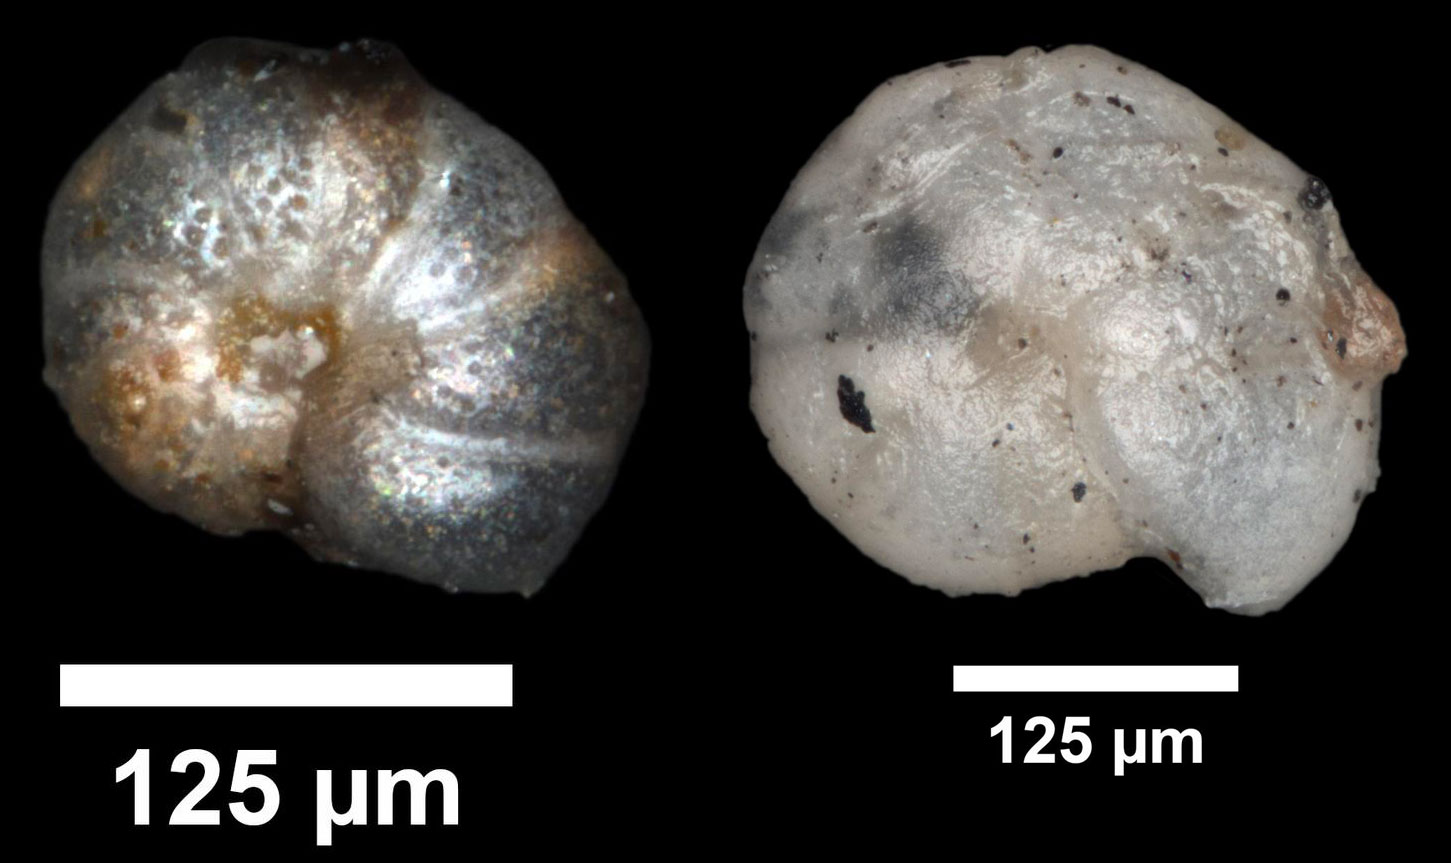 Photographs of two forams from the Late Cretaceous Pierre Shale of South Dakota. Each foram spirals in a single plain. The left gray, the right off-white. Each has a 125 micron (0.125 millimeter) scale bar.